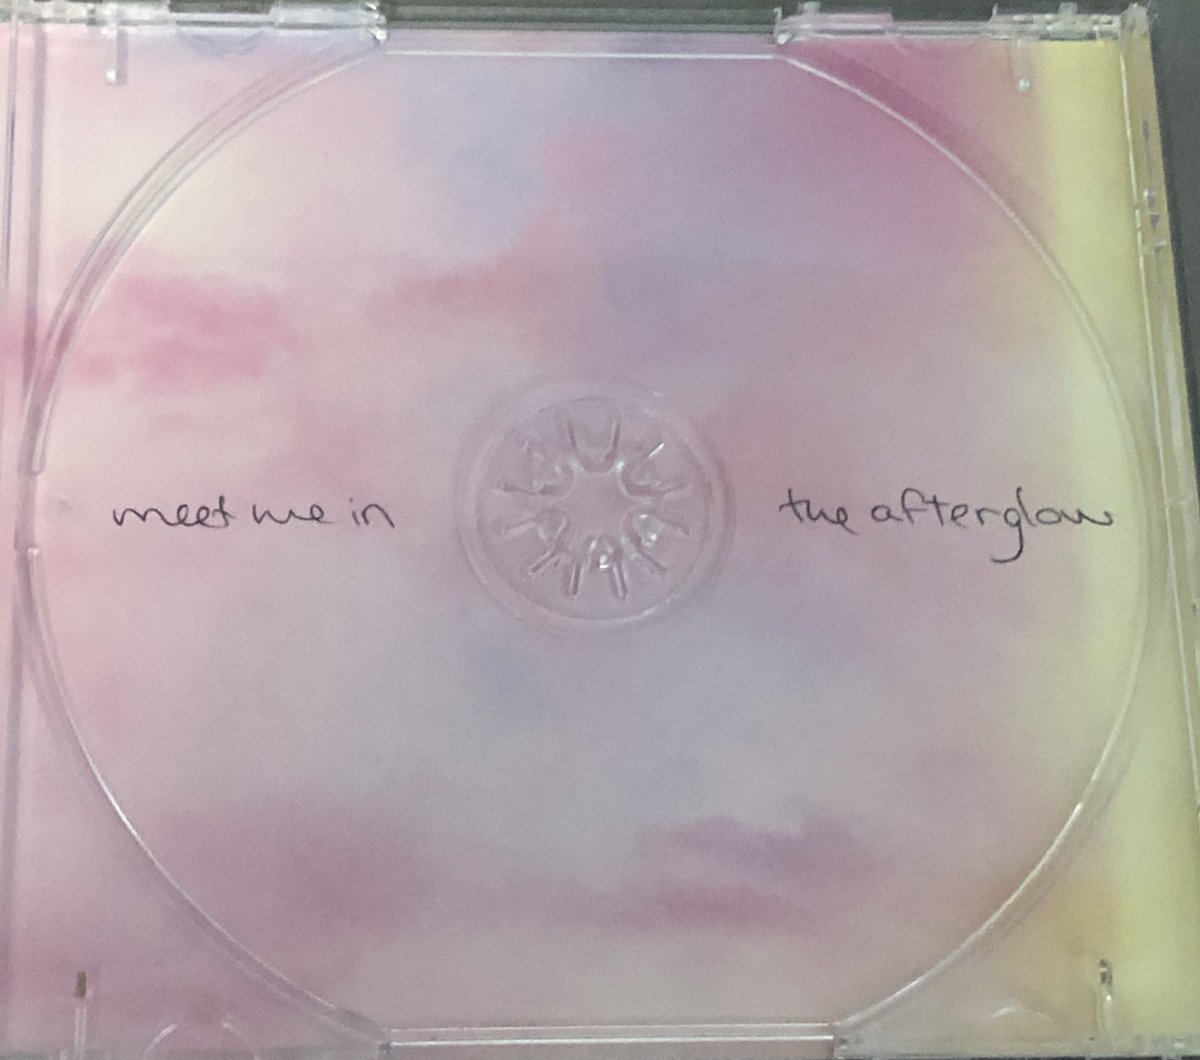 Interesting choice of lyrics given “meet me in the afterglow” is literally HIDDEN behind the CD in Lover... i think she’s going to announce something... or something is coming... could it be TS8  @taylorswift13  @taylornation13  https://twitter.com/abcnetwork/status/1260645999141244928?s=21  https://twitter.com/ABCNetwork/status/1260645999141244928